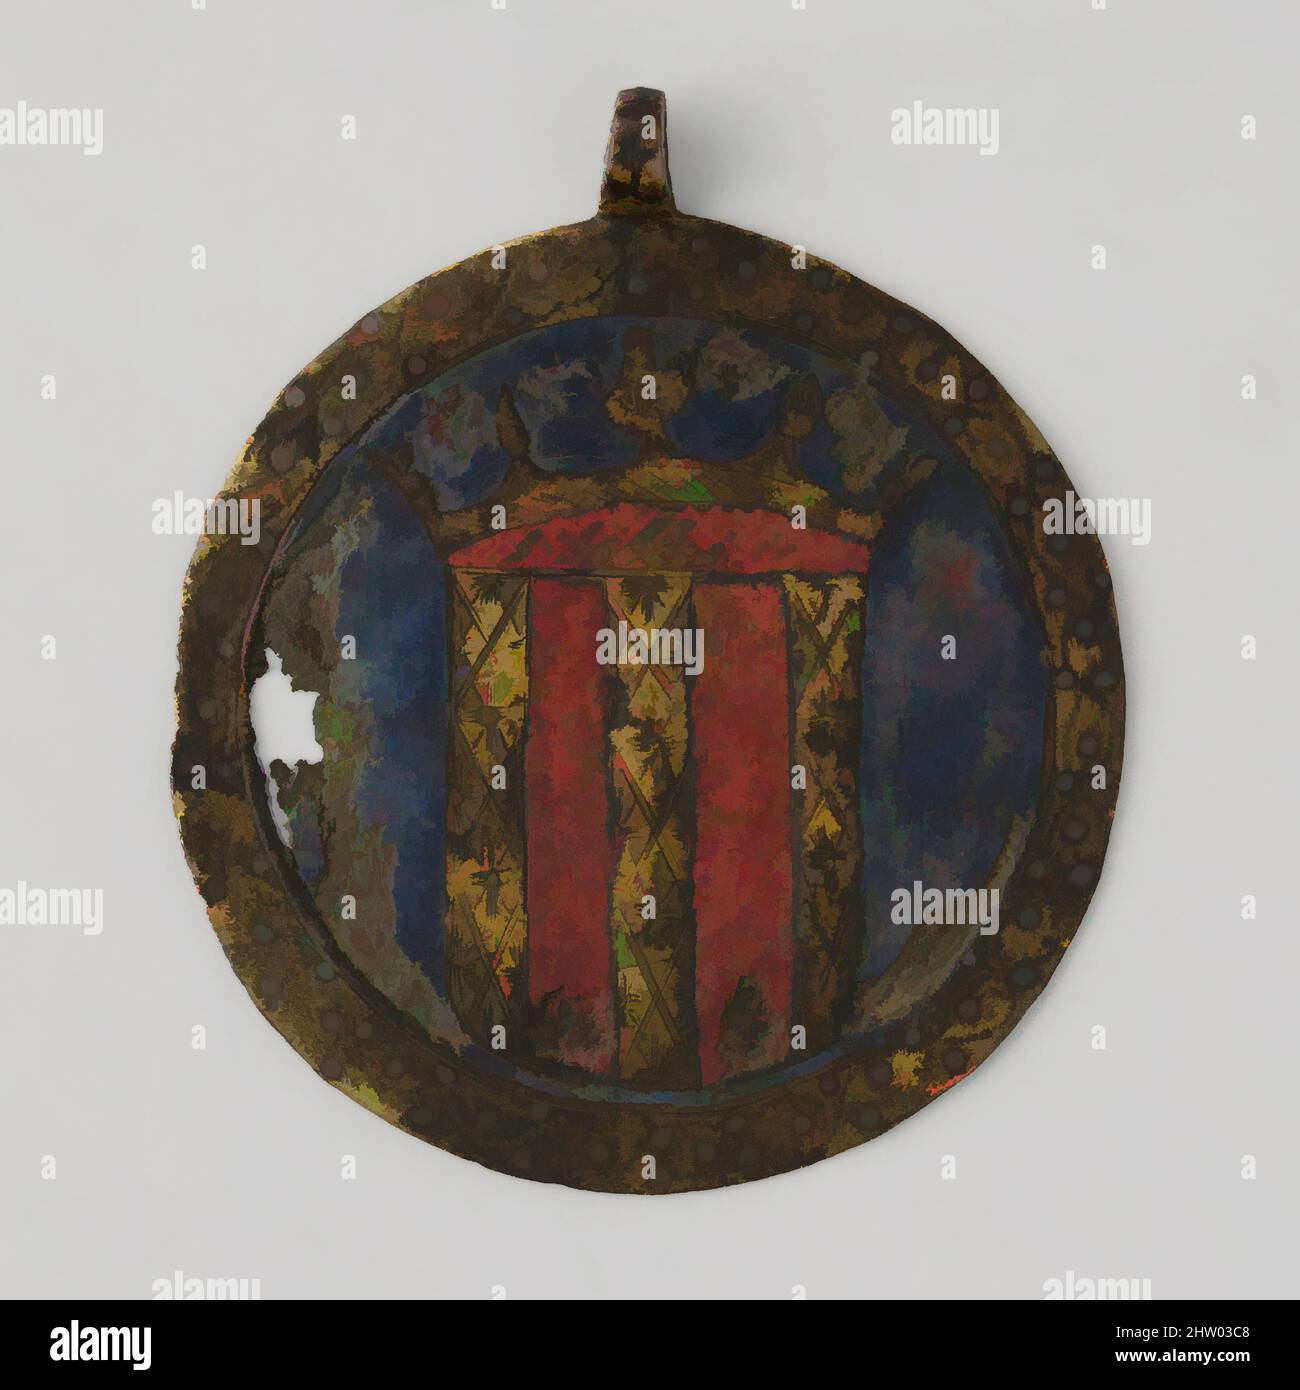 Art inspired by Horse Trapping, 14th century, Made in Catalonia, Spain, Catalan, Gilded copper alloy, with enamels, Overall: 9 1/16in. (23cm), Metalwork-Copper alloy, Classic works modernized by Artotop with a splash of modernity. Shapes, color and value, eye-catching visual impact on art. Emotions through freedom of artworks in a contemporary way. A timeless message pursuing a wildly creative new direction. Artists turning to the digital medium and creating the Artotop NFT Stock Photo